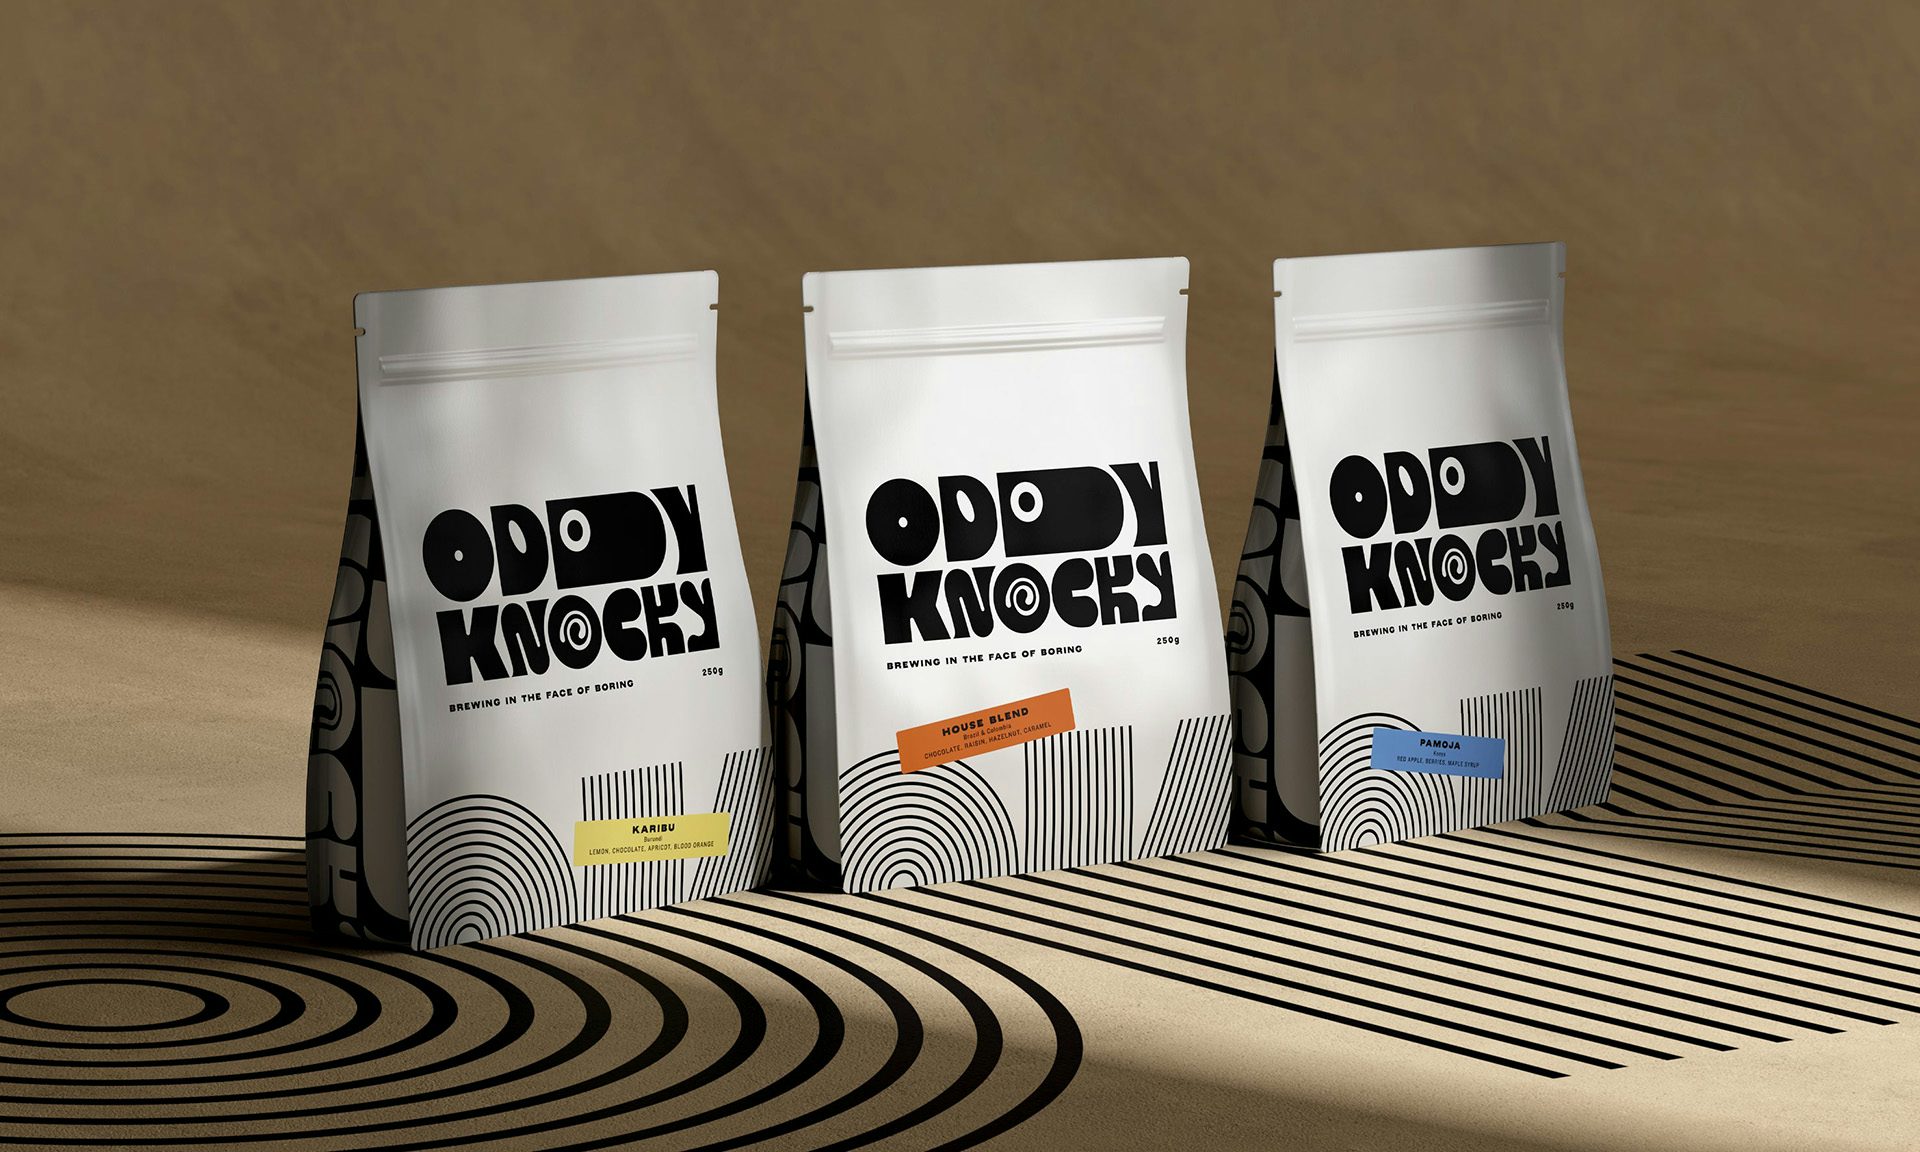 Photo showing the branding for Oddy Knocky on three product packages decorated with the brand's quirky elongated wordmark